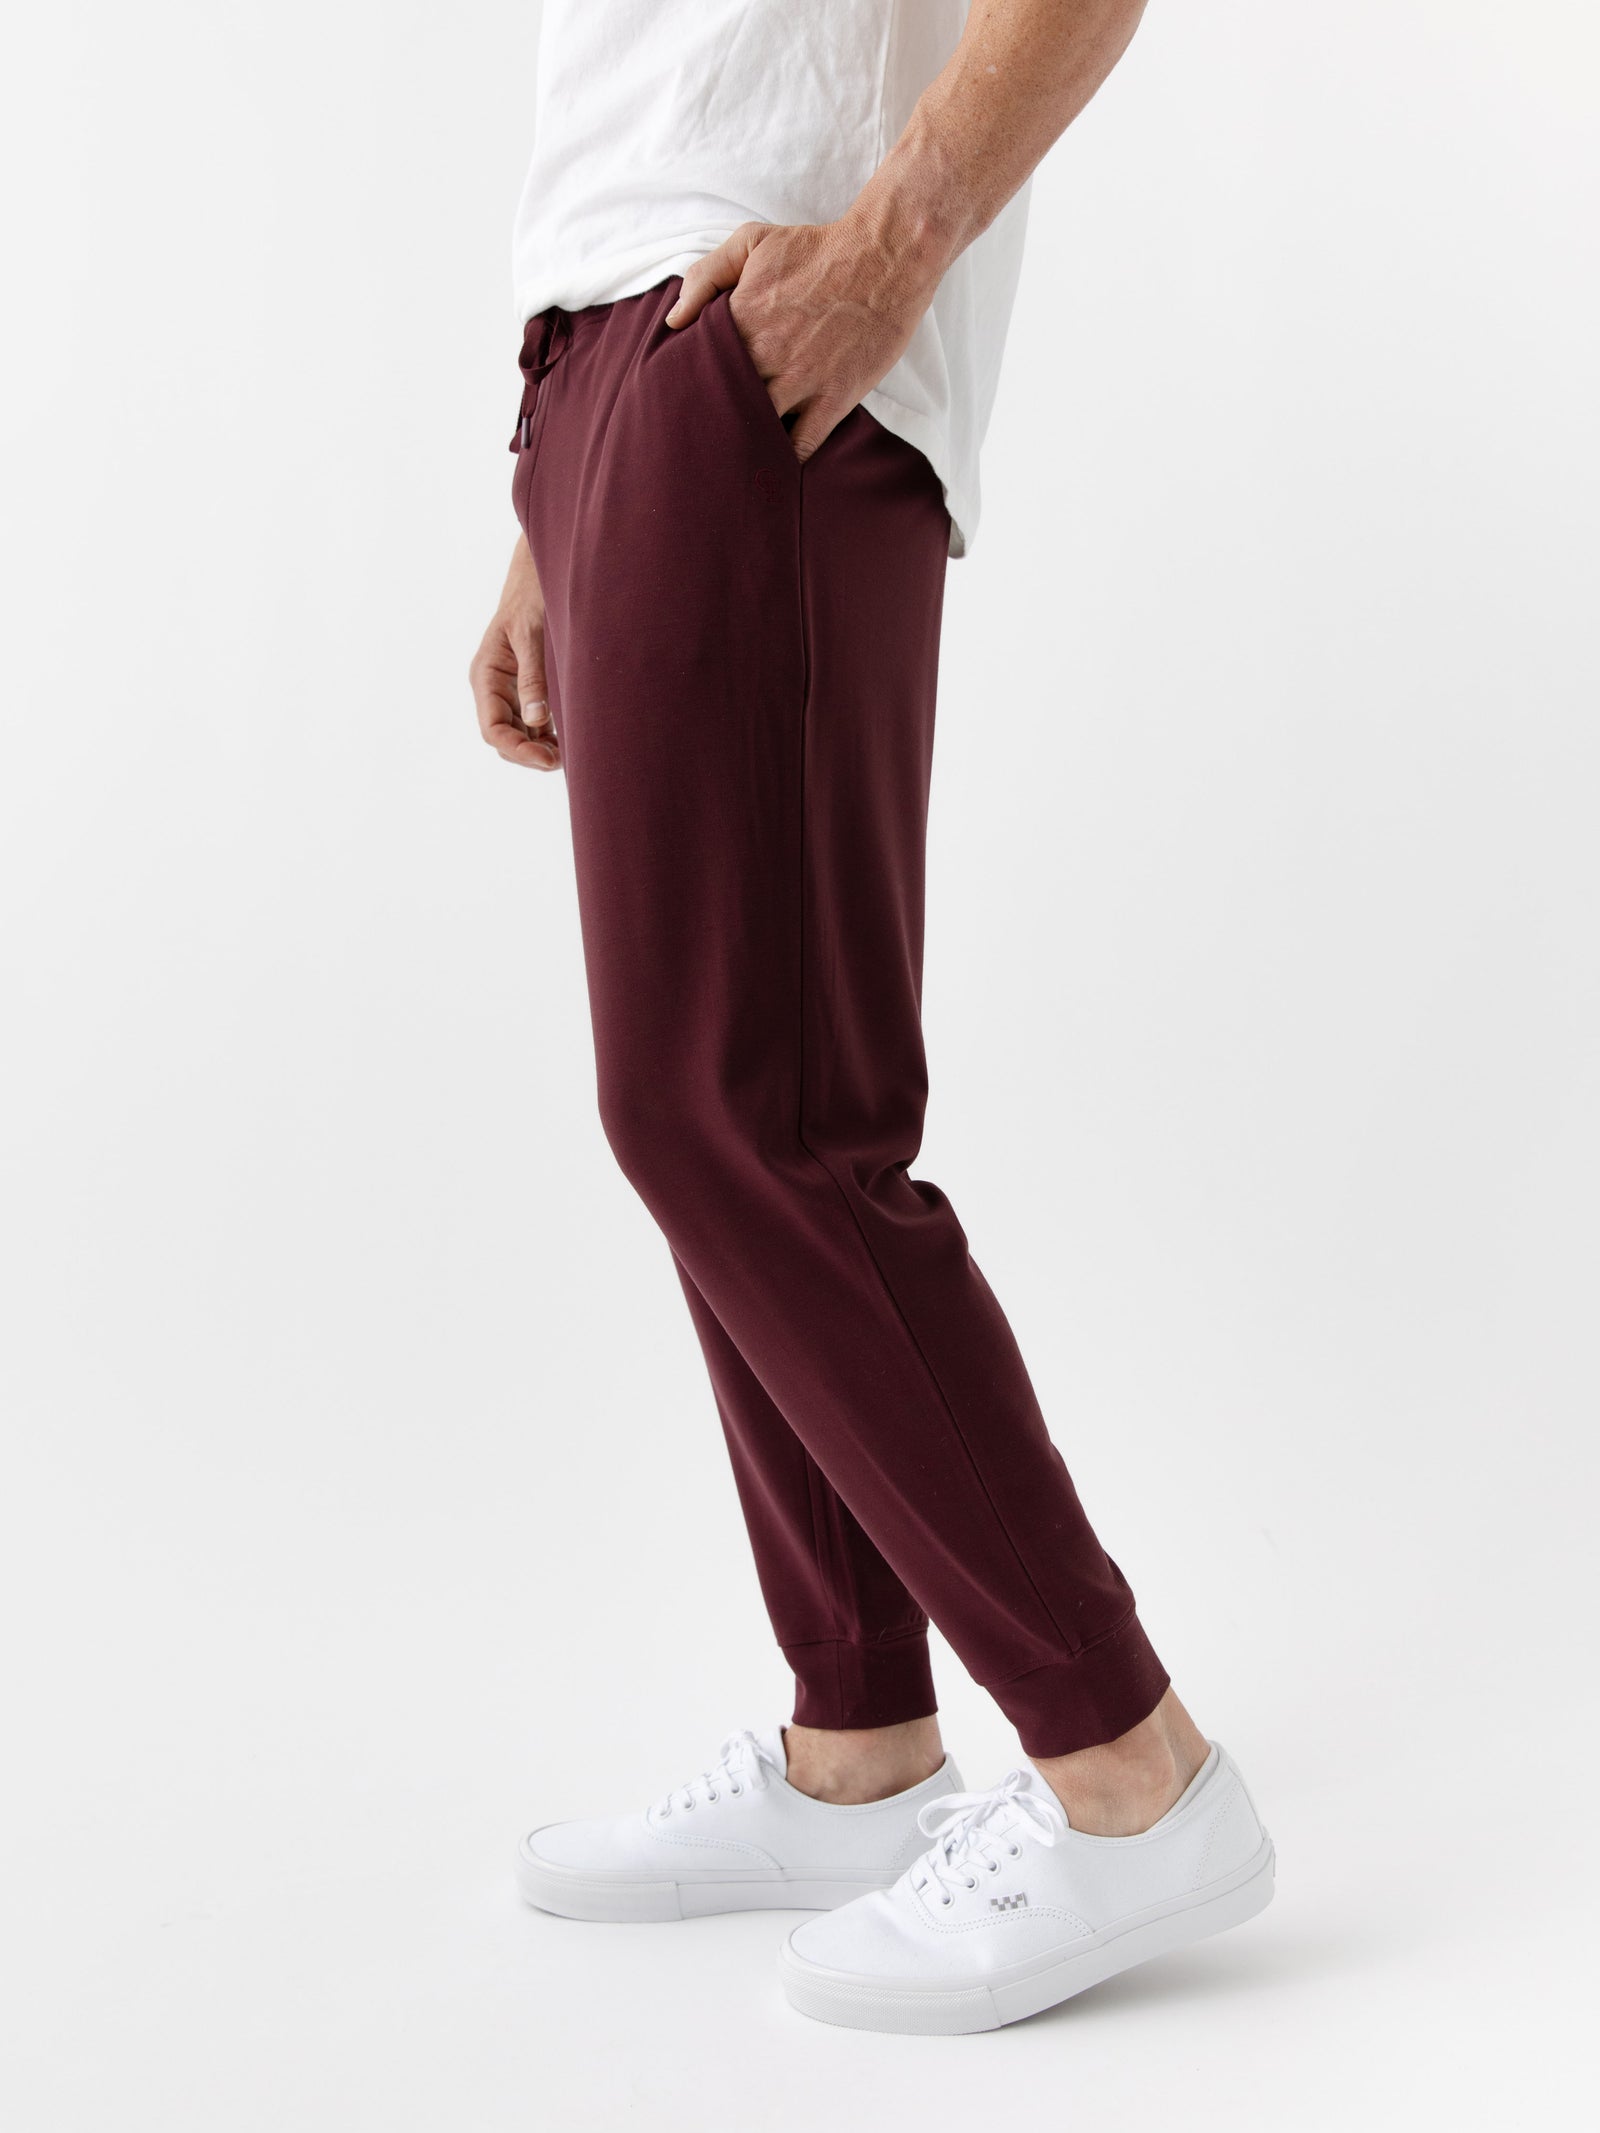 Burgundy/Light GreyMen's Bamboo Jogger Set. There is a man wearing the jogger set. He is standing in a well lit room in a home.